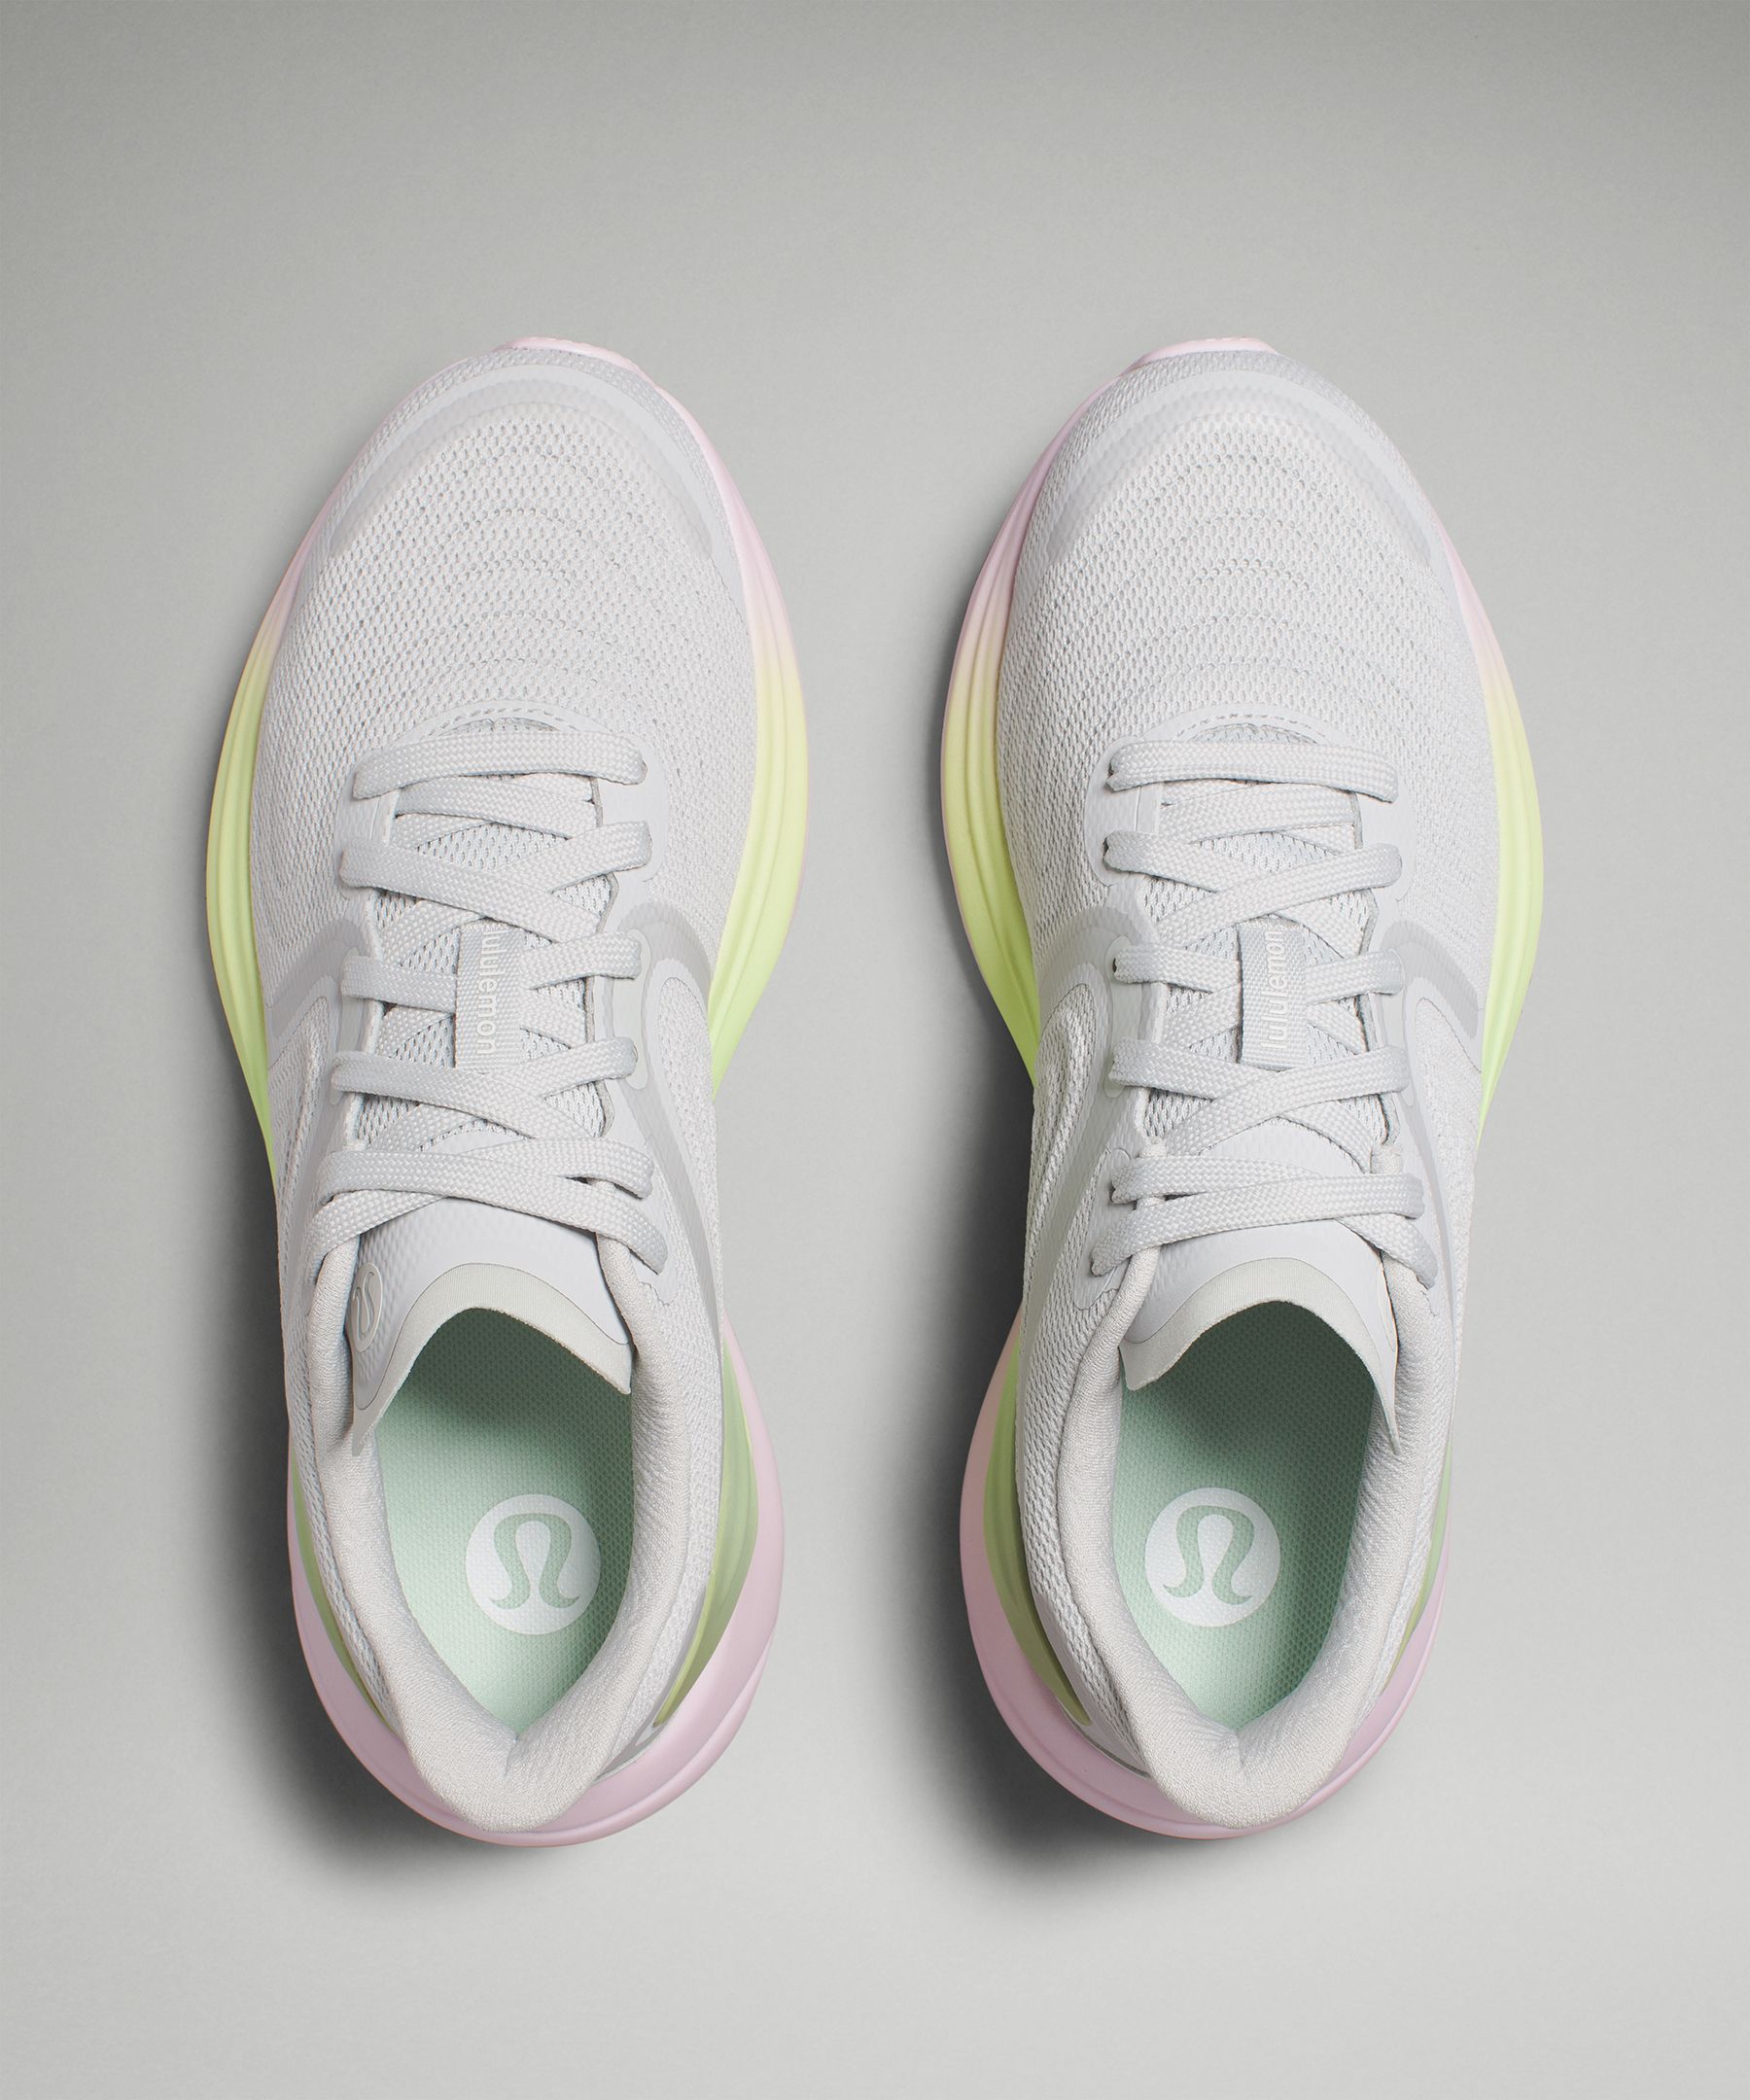 Lululemon 'What's New' features Blissfeel 2 Women's Running Shoe, high-rise  crop and more 